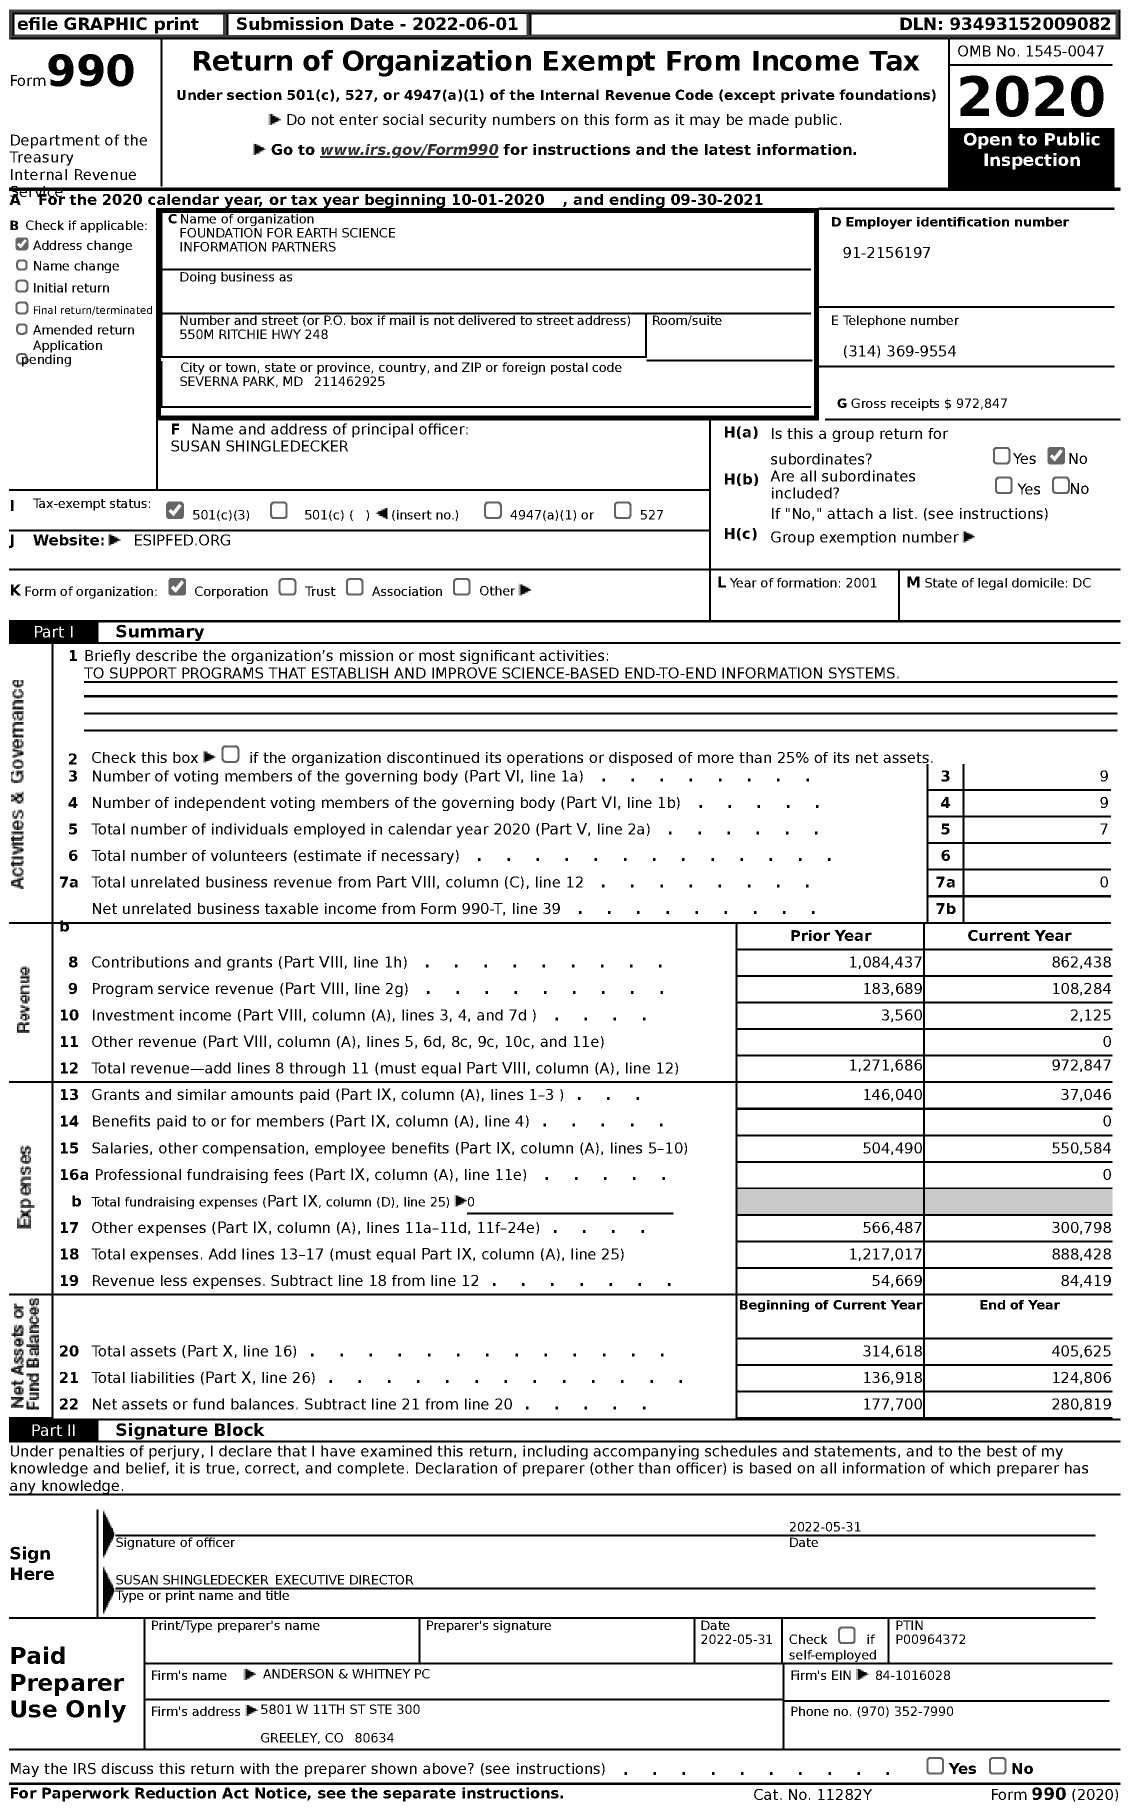 Image of first page of 2020 Form 990 for Foundation for Earth Science Information Partners (FES)